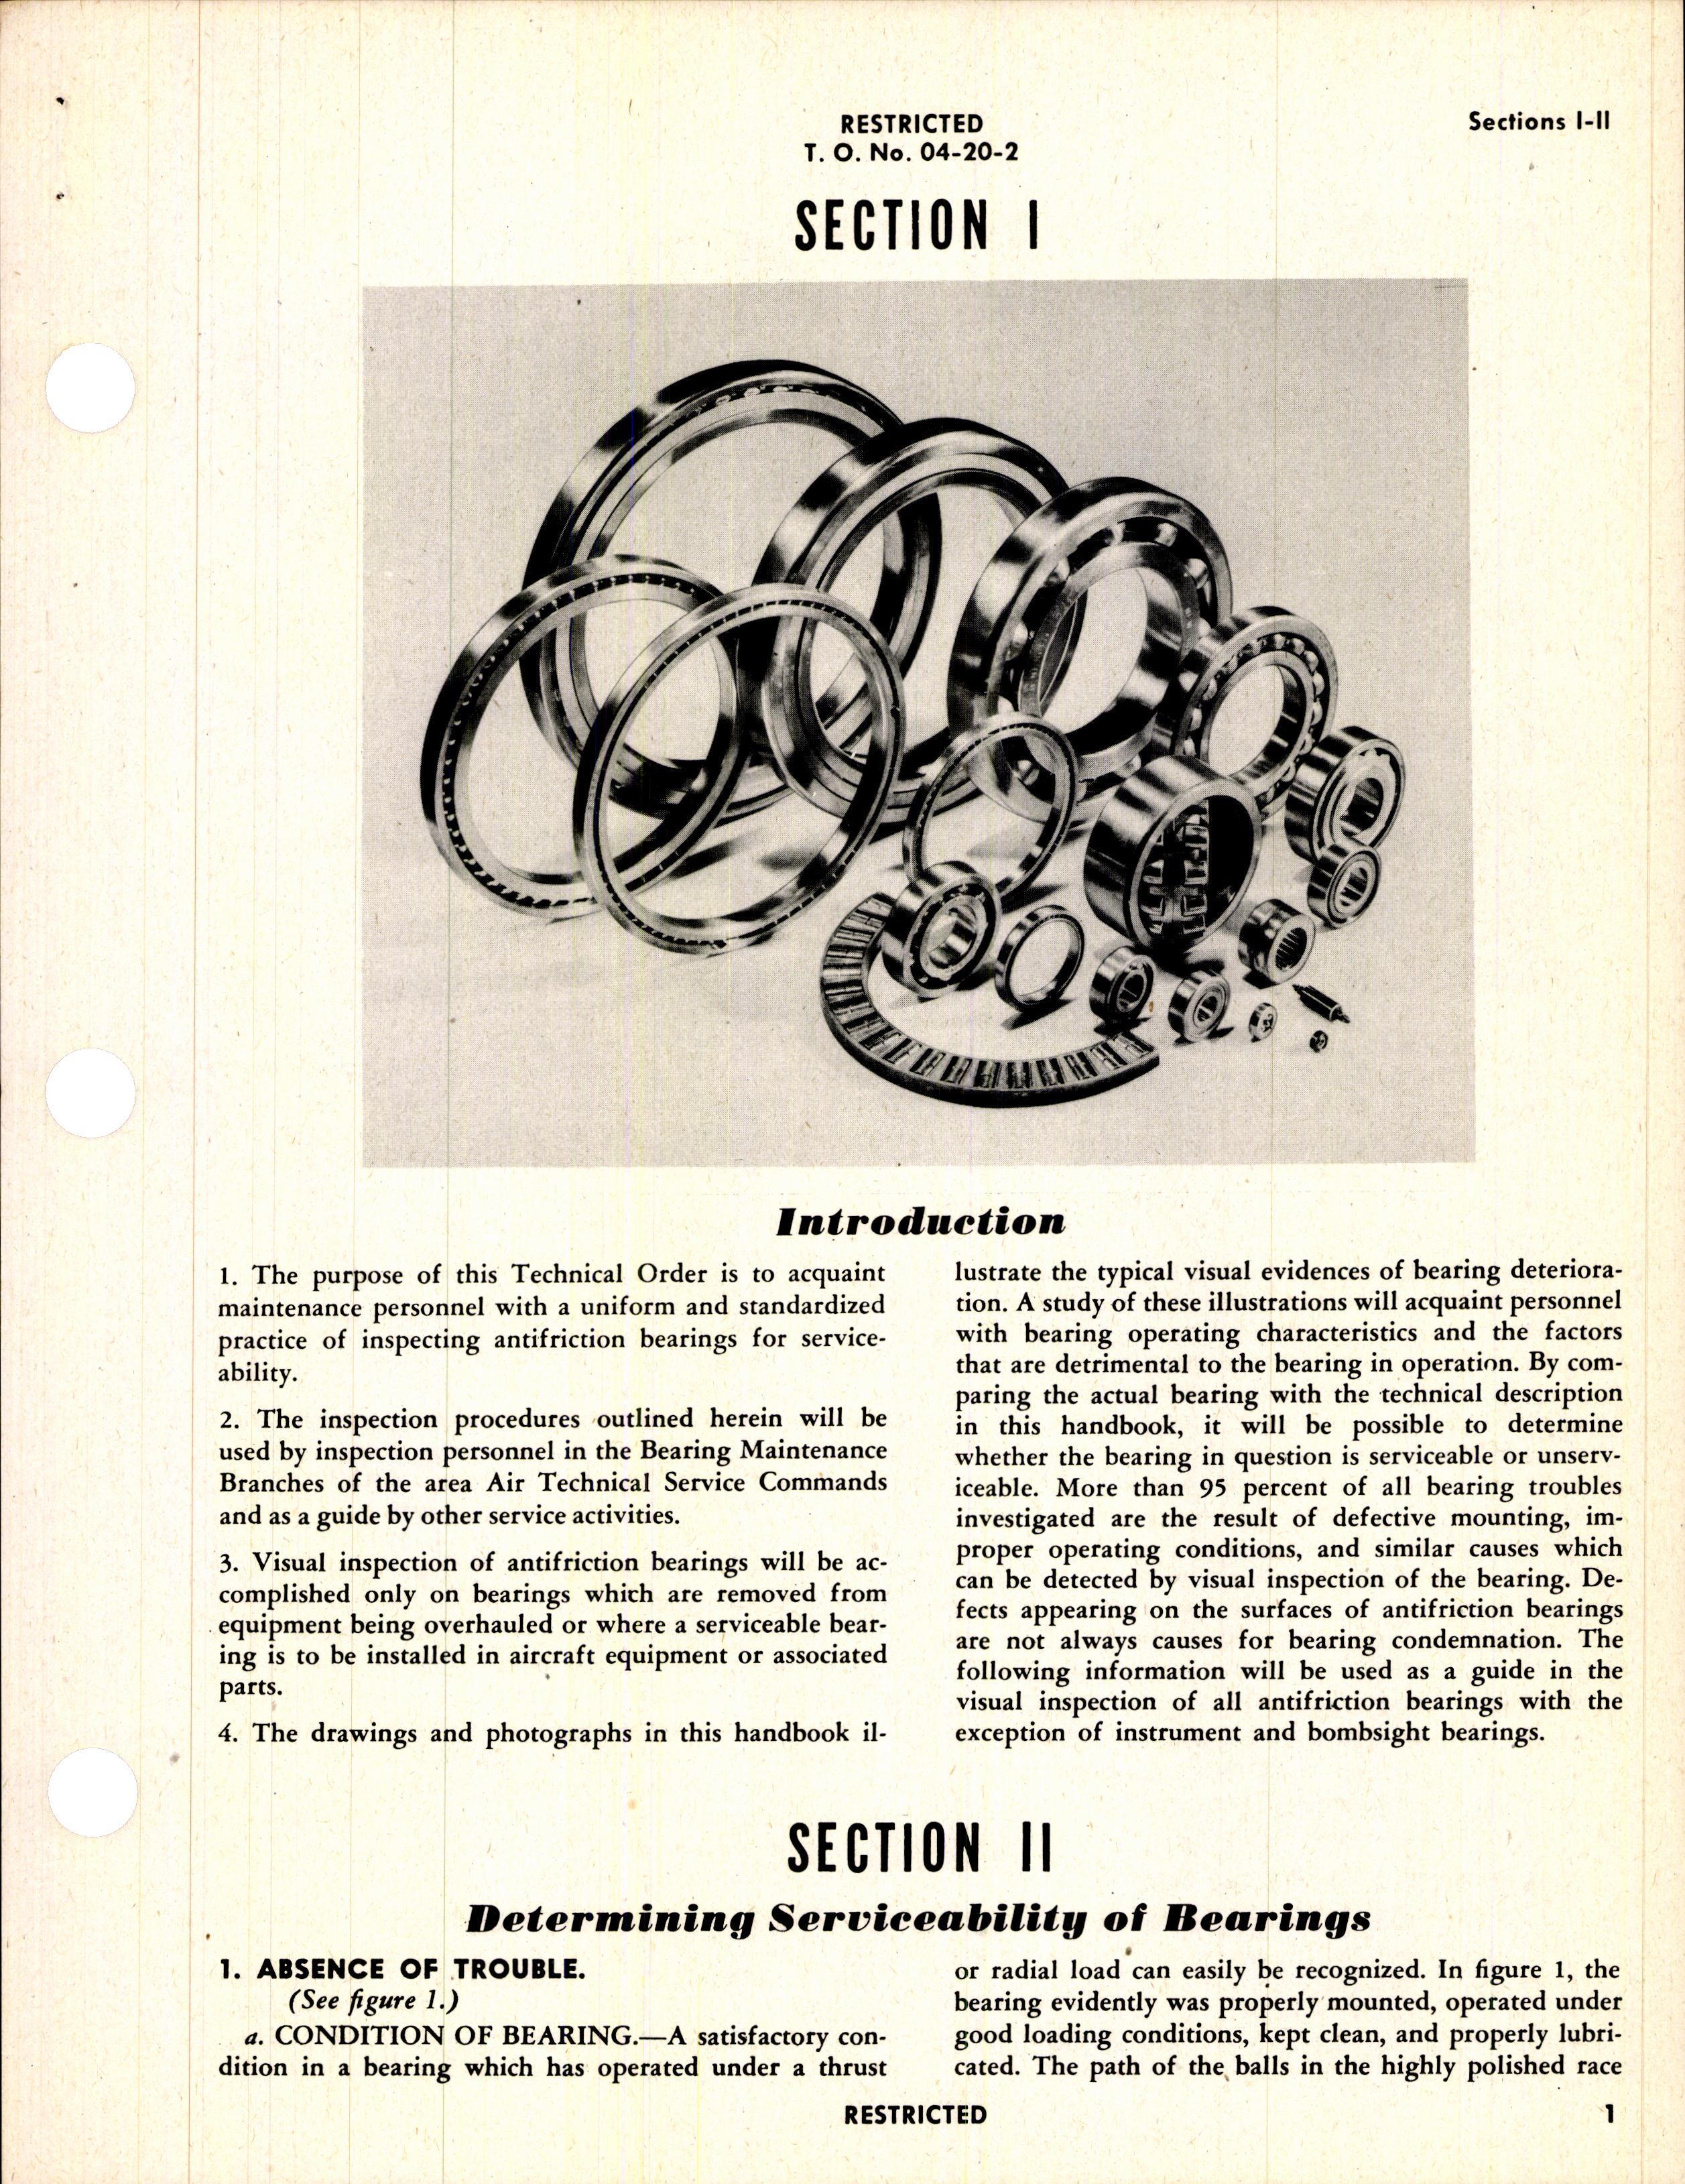 Sample page 5 from AirCorps Library document: Inspection Procedures for Antifriction Bearings